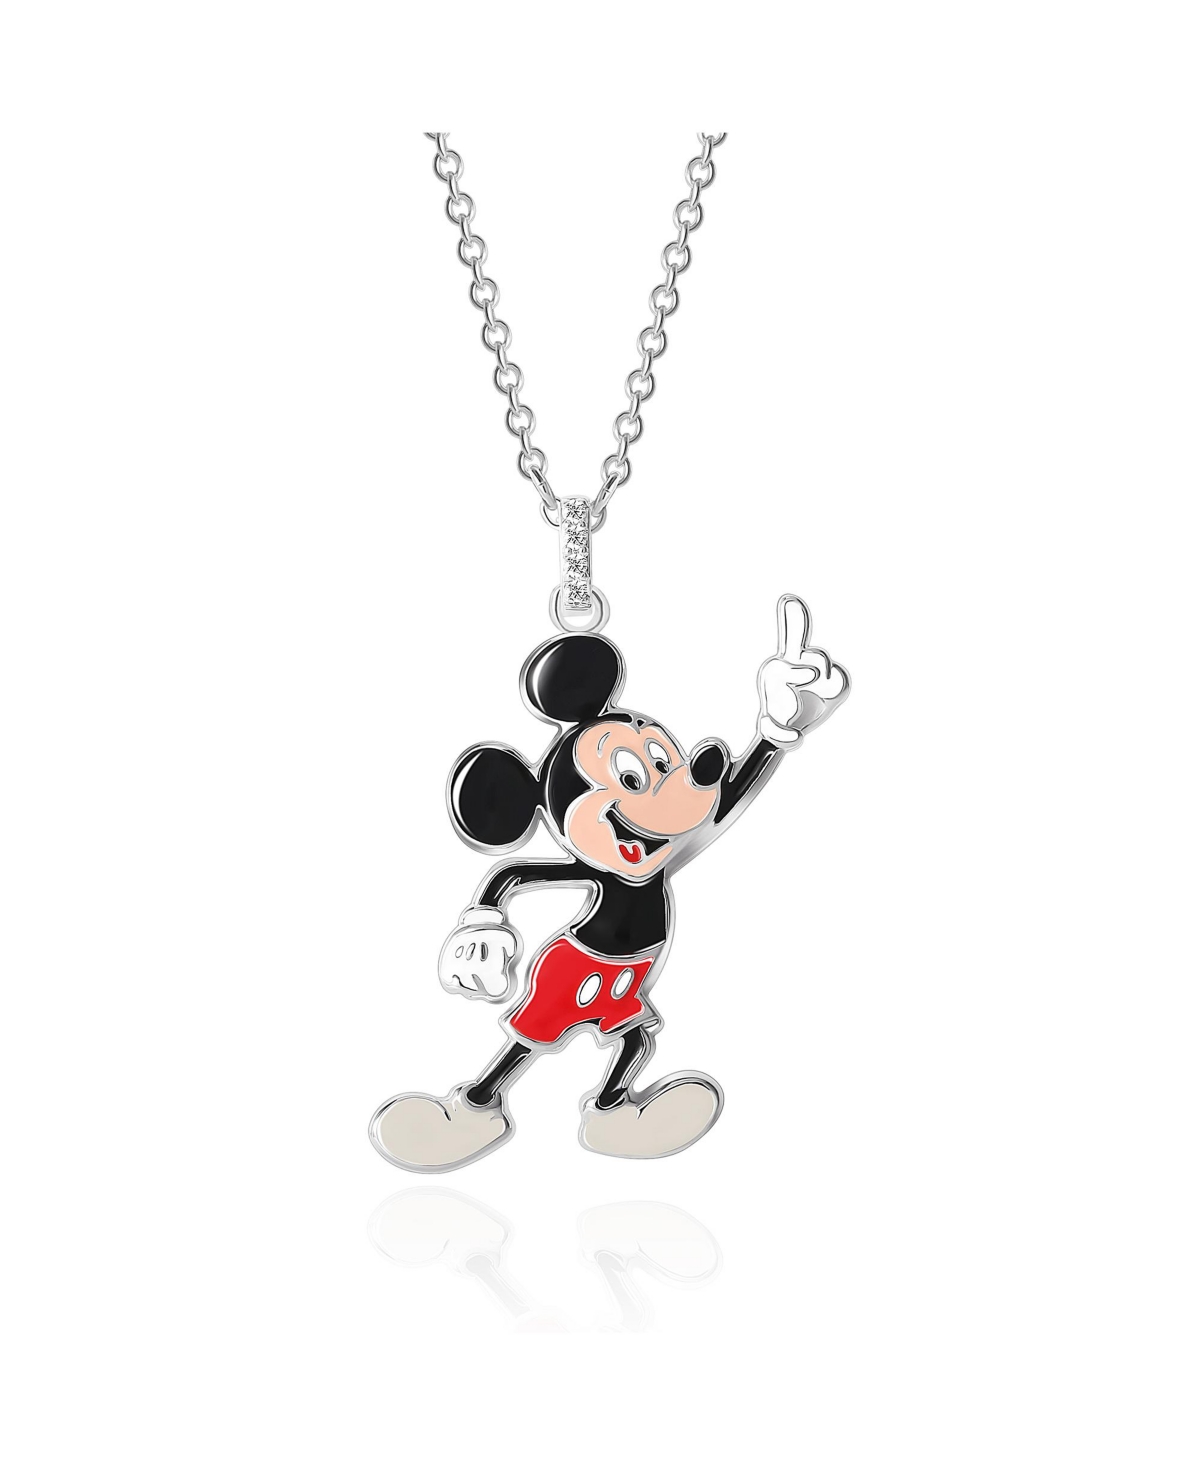 100 Mickey Mouse Silver Plated 3D Pendant Necklace - 18'' Chain - Officially Licensed, Limited Edition - Silver tone, red, black